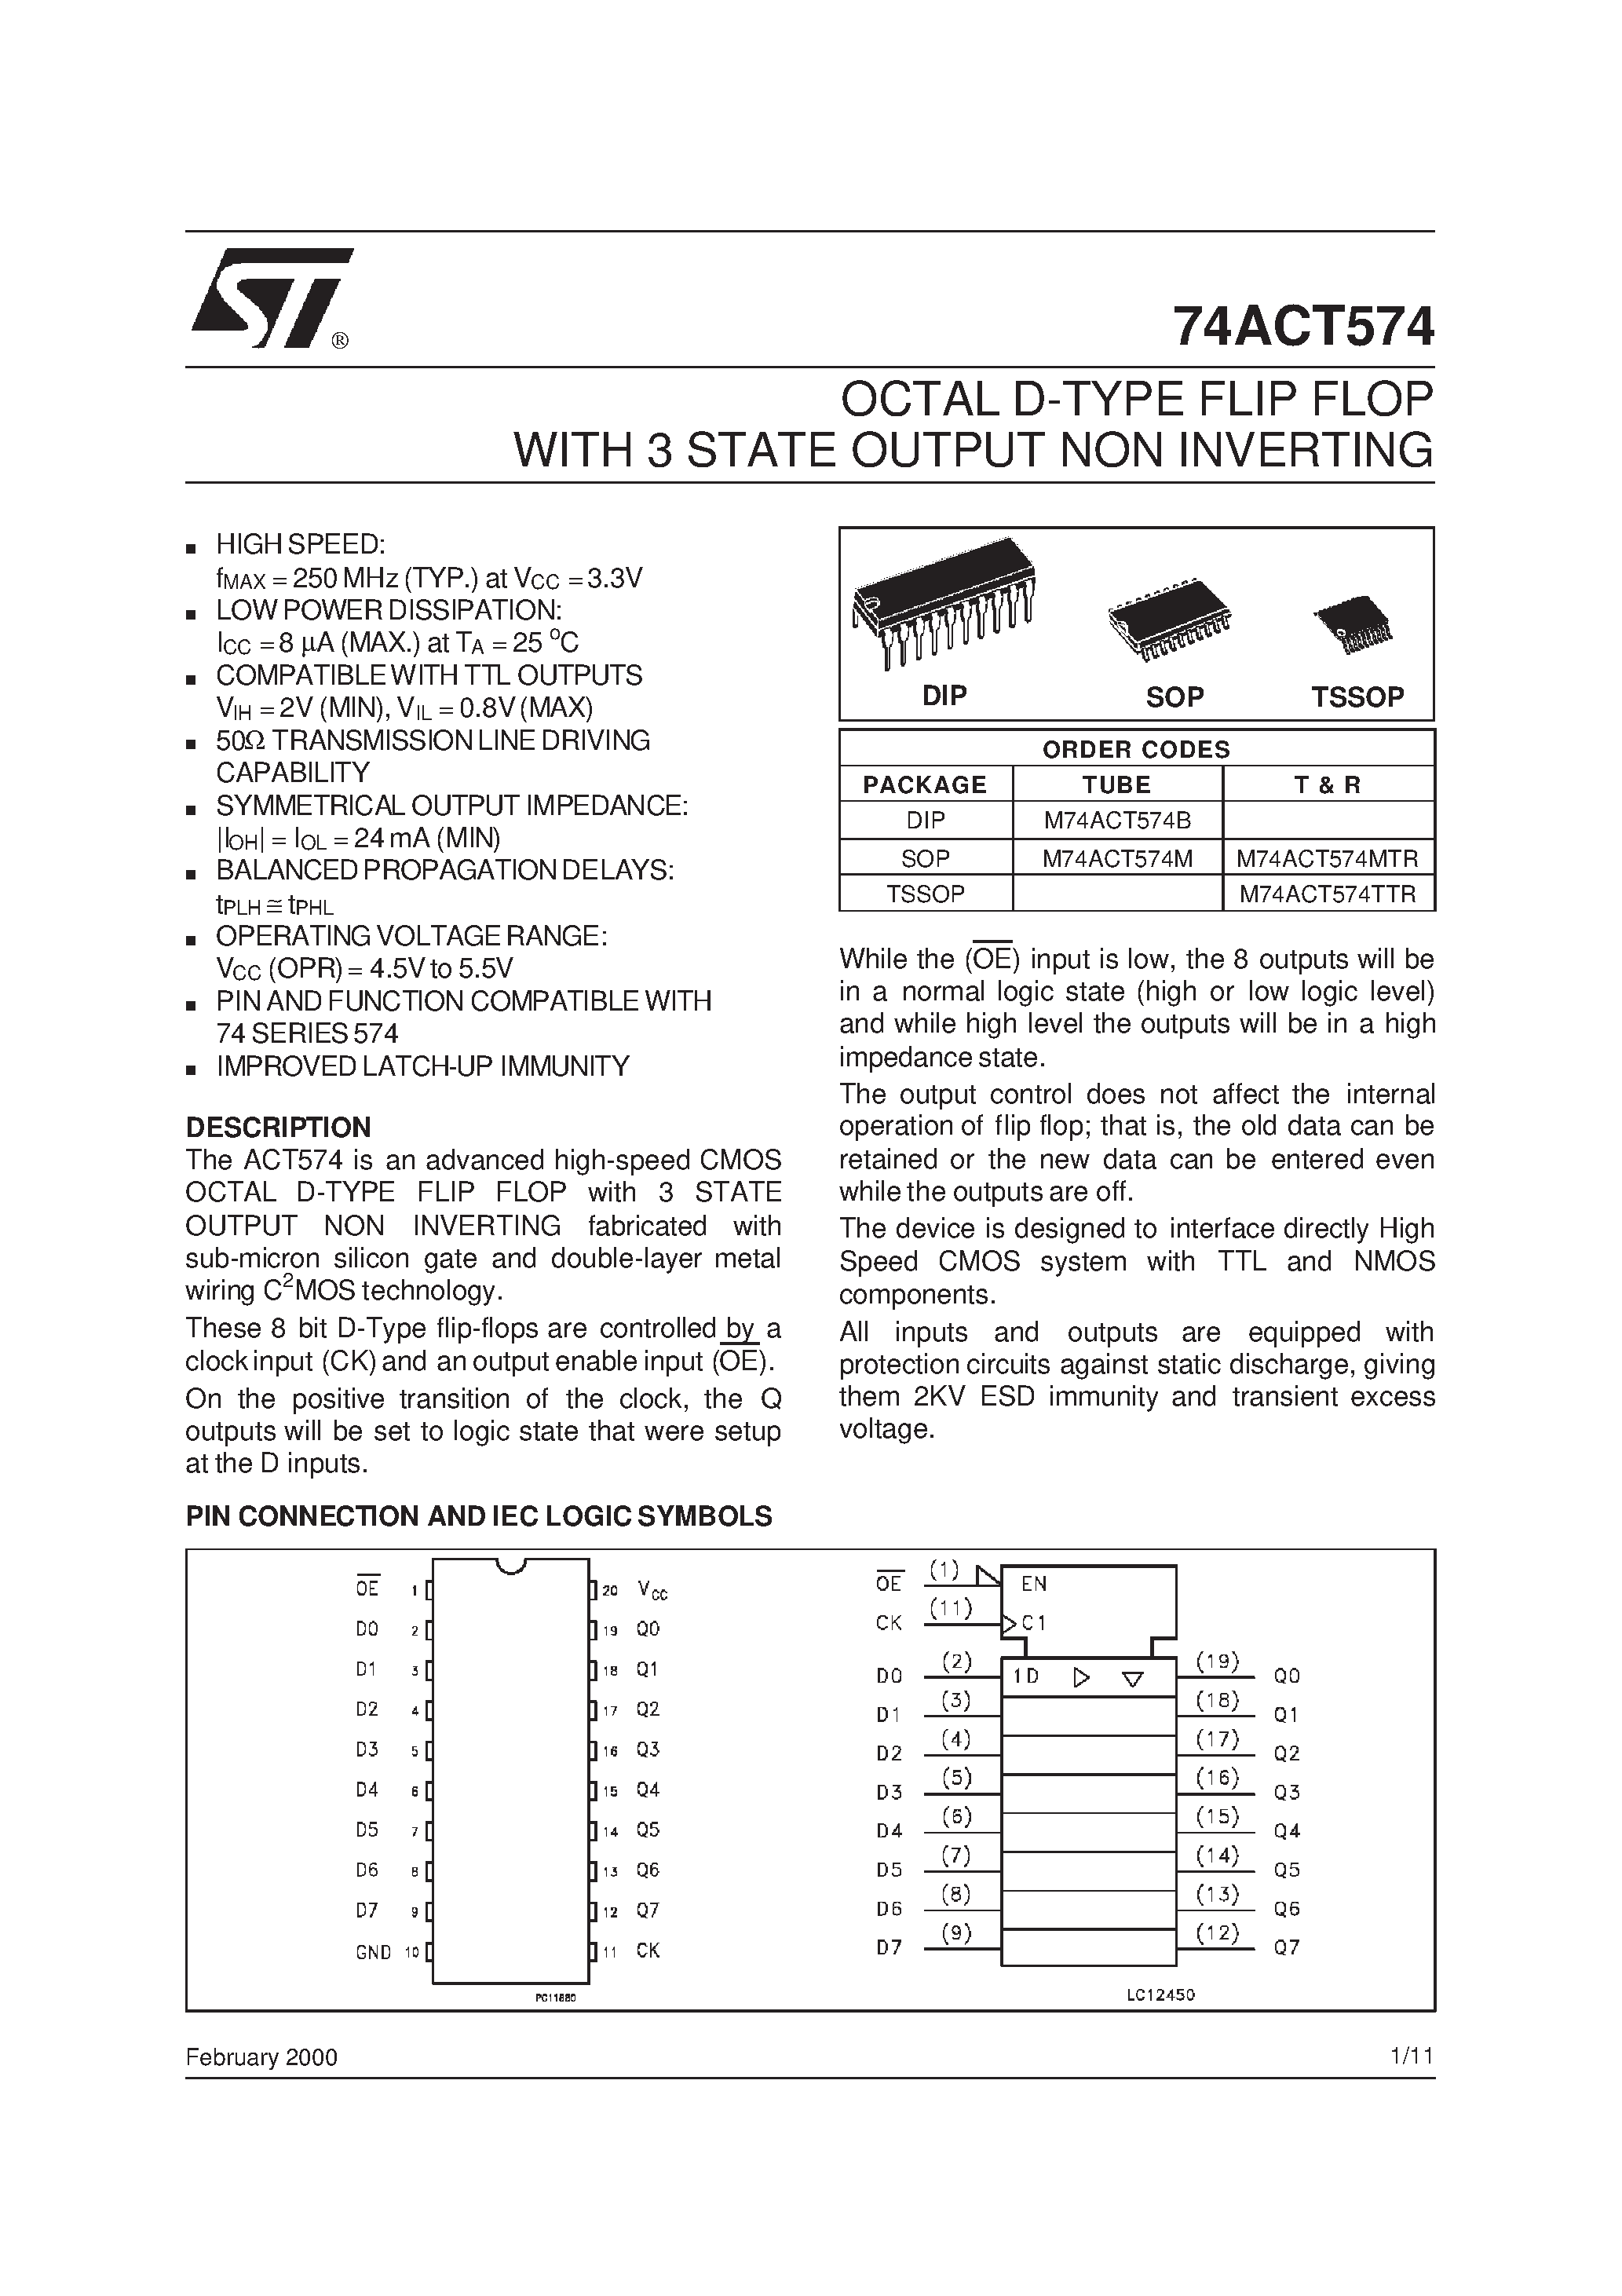 Datasheet M74ACT574B - OCTAL D-TYPE FLIP FLOP WITH 3 STATE OUTPUT NON INVERTING page 1